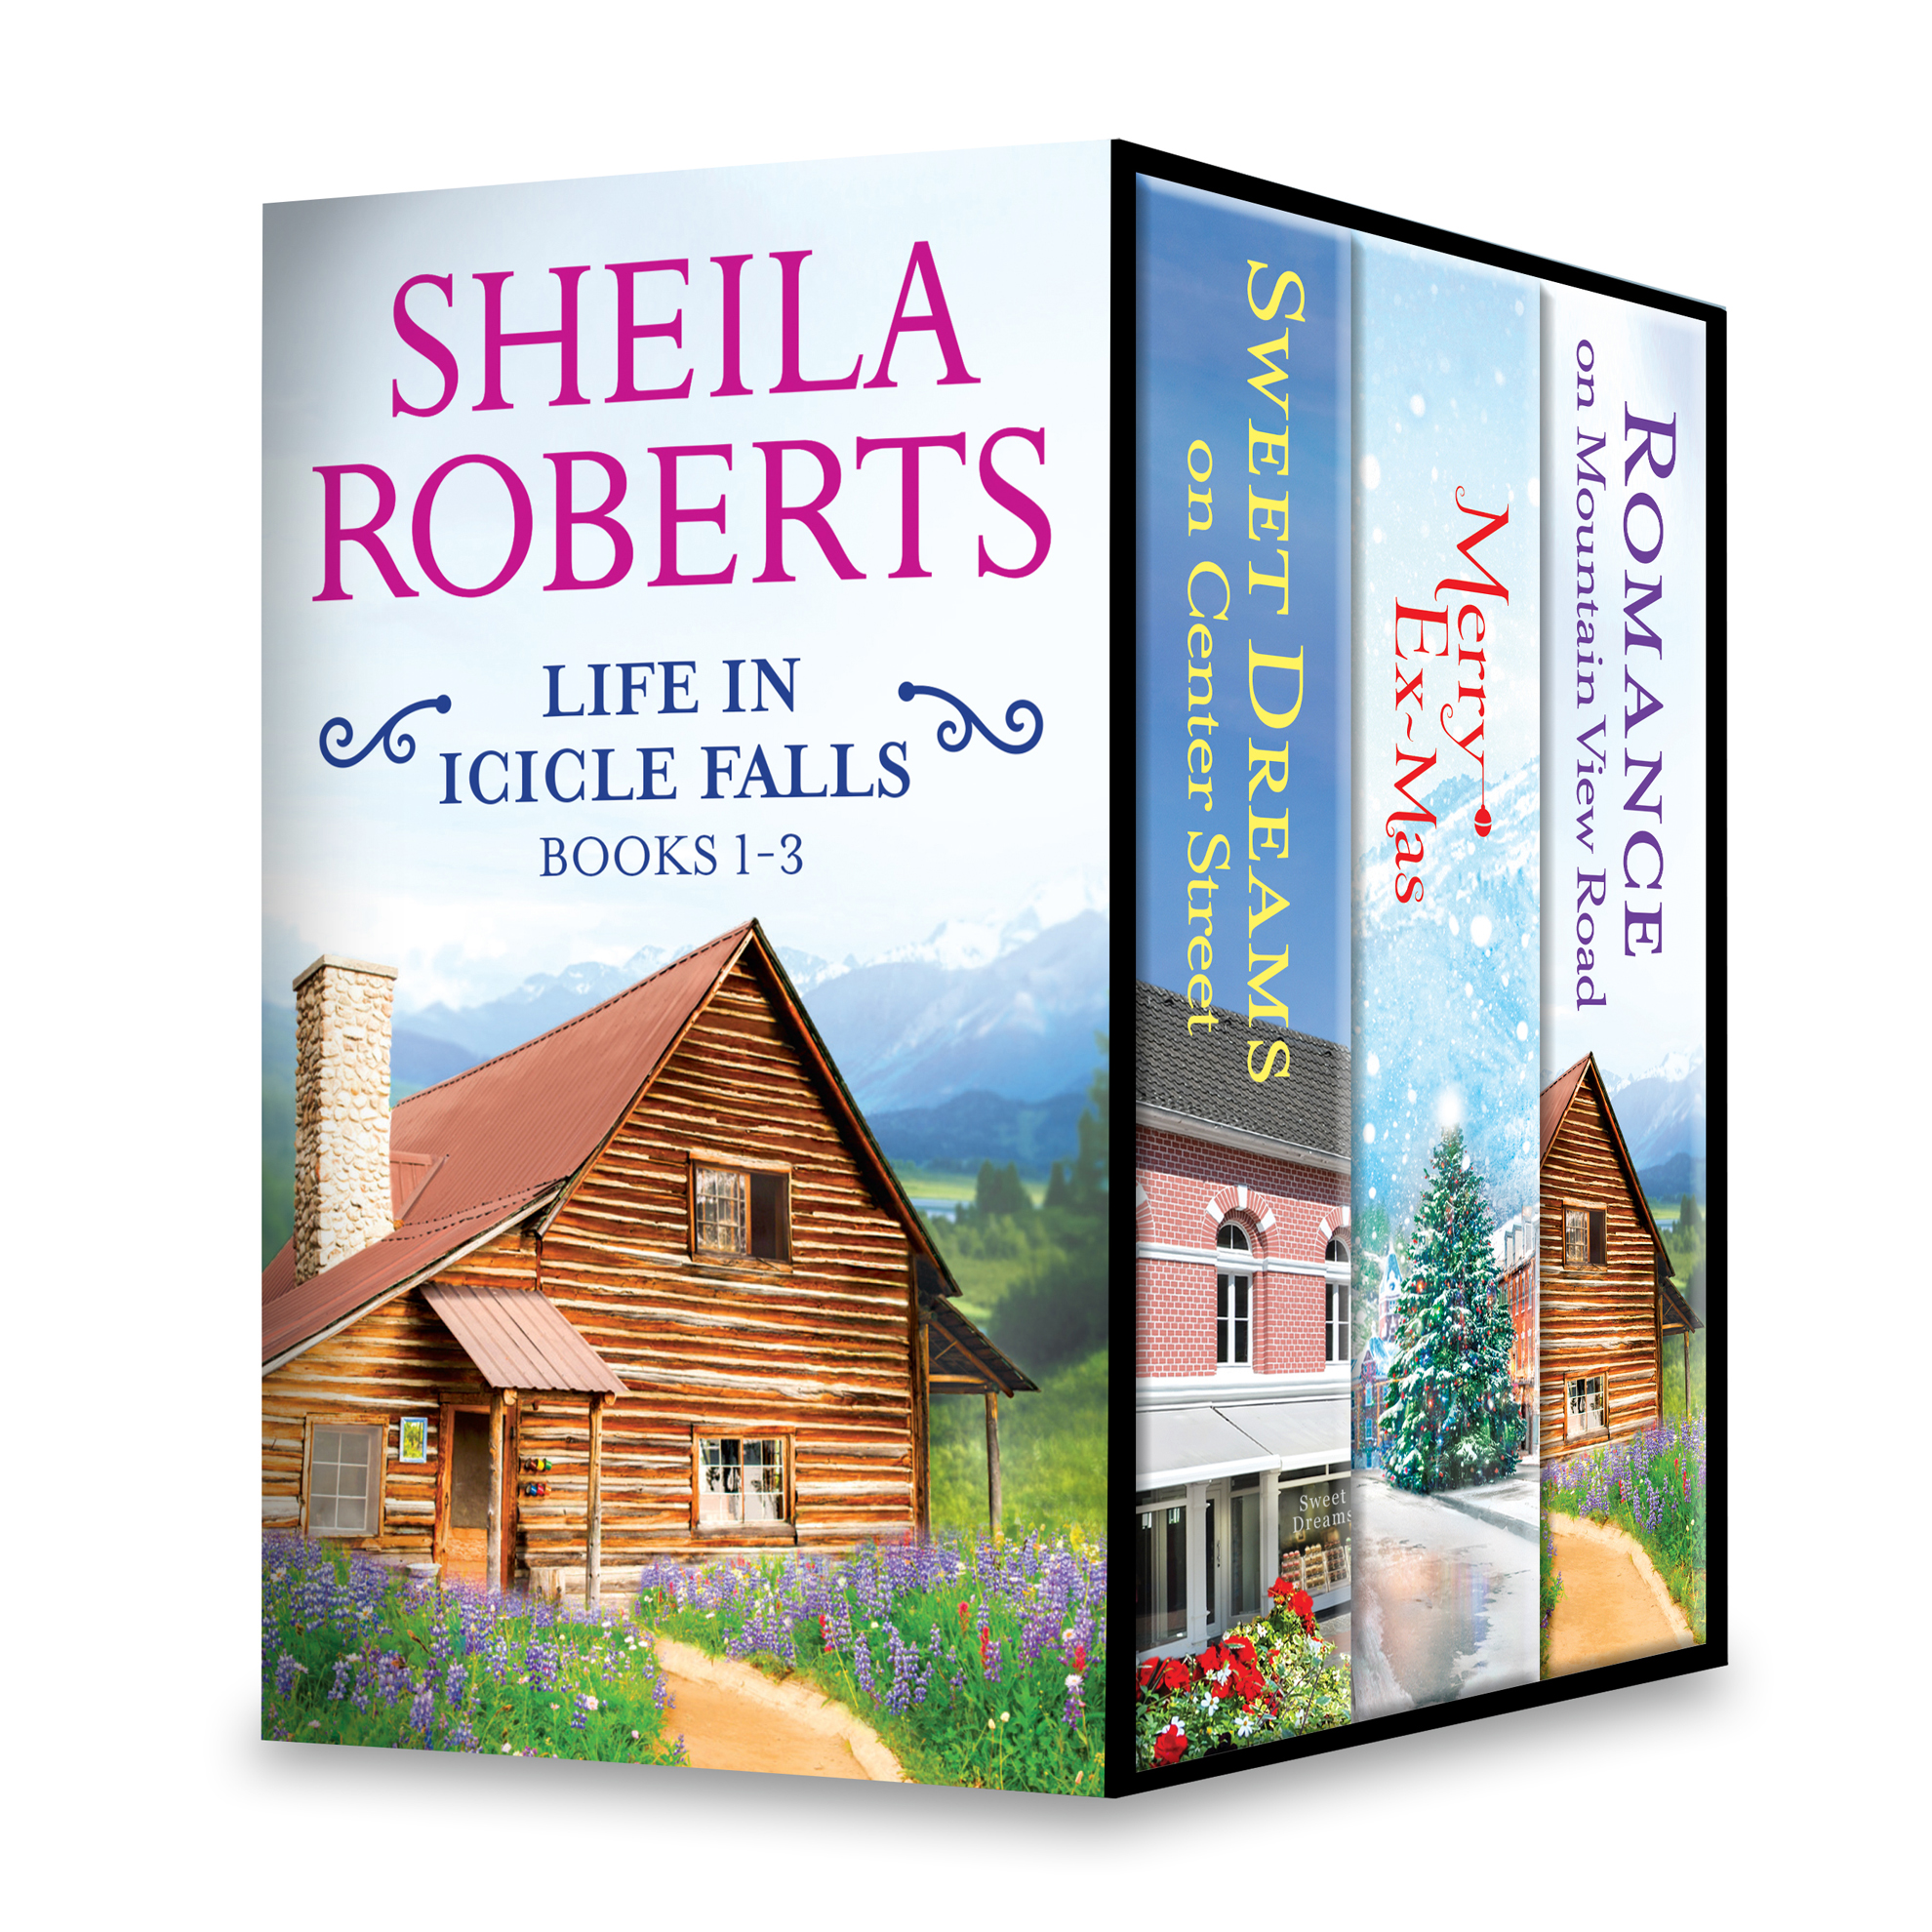 Umschlagbild für Sheila Roberts Life in Icicle Falls Series Books 1-3 [electronic resource] : An Anthology